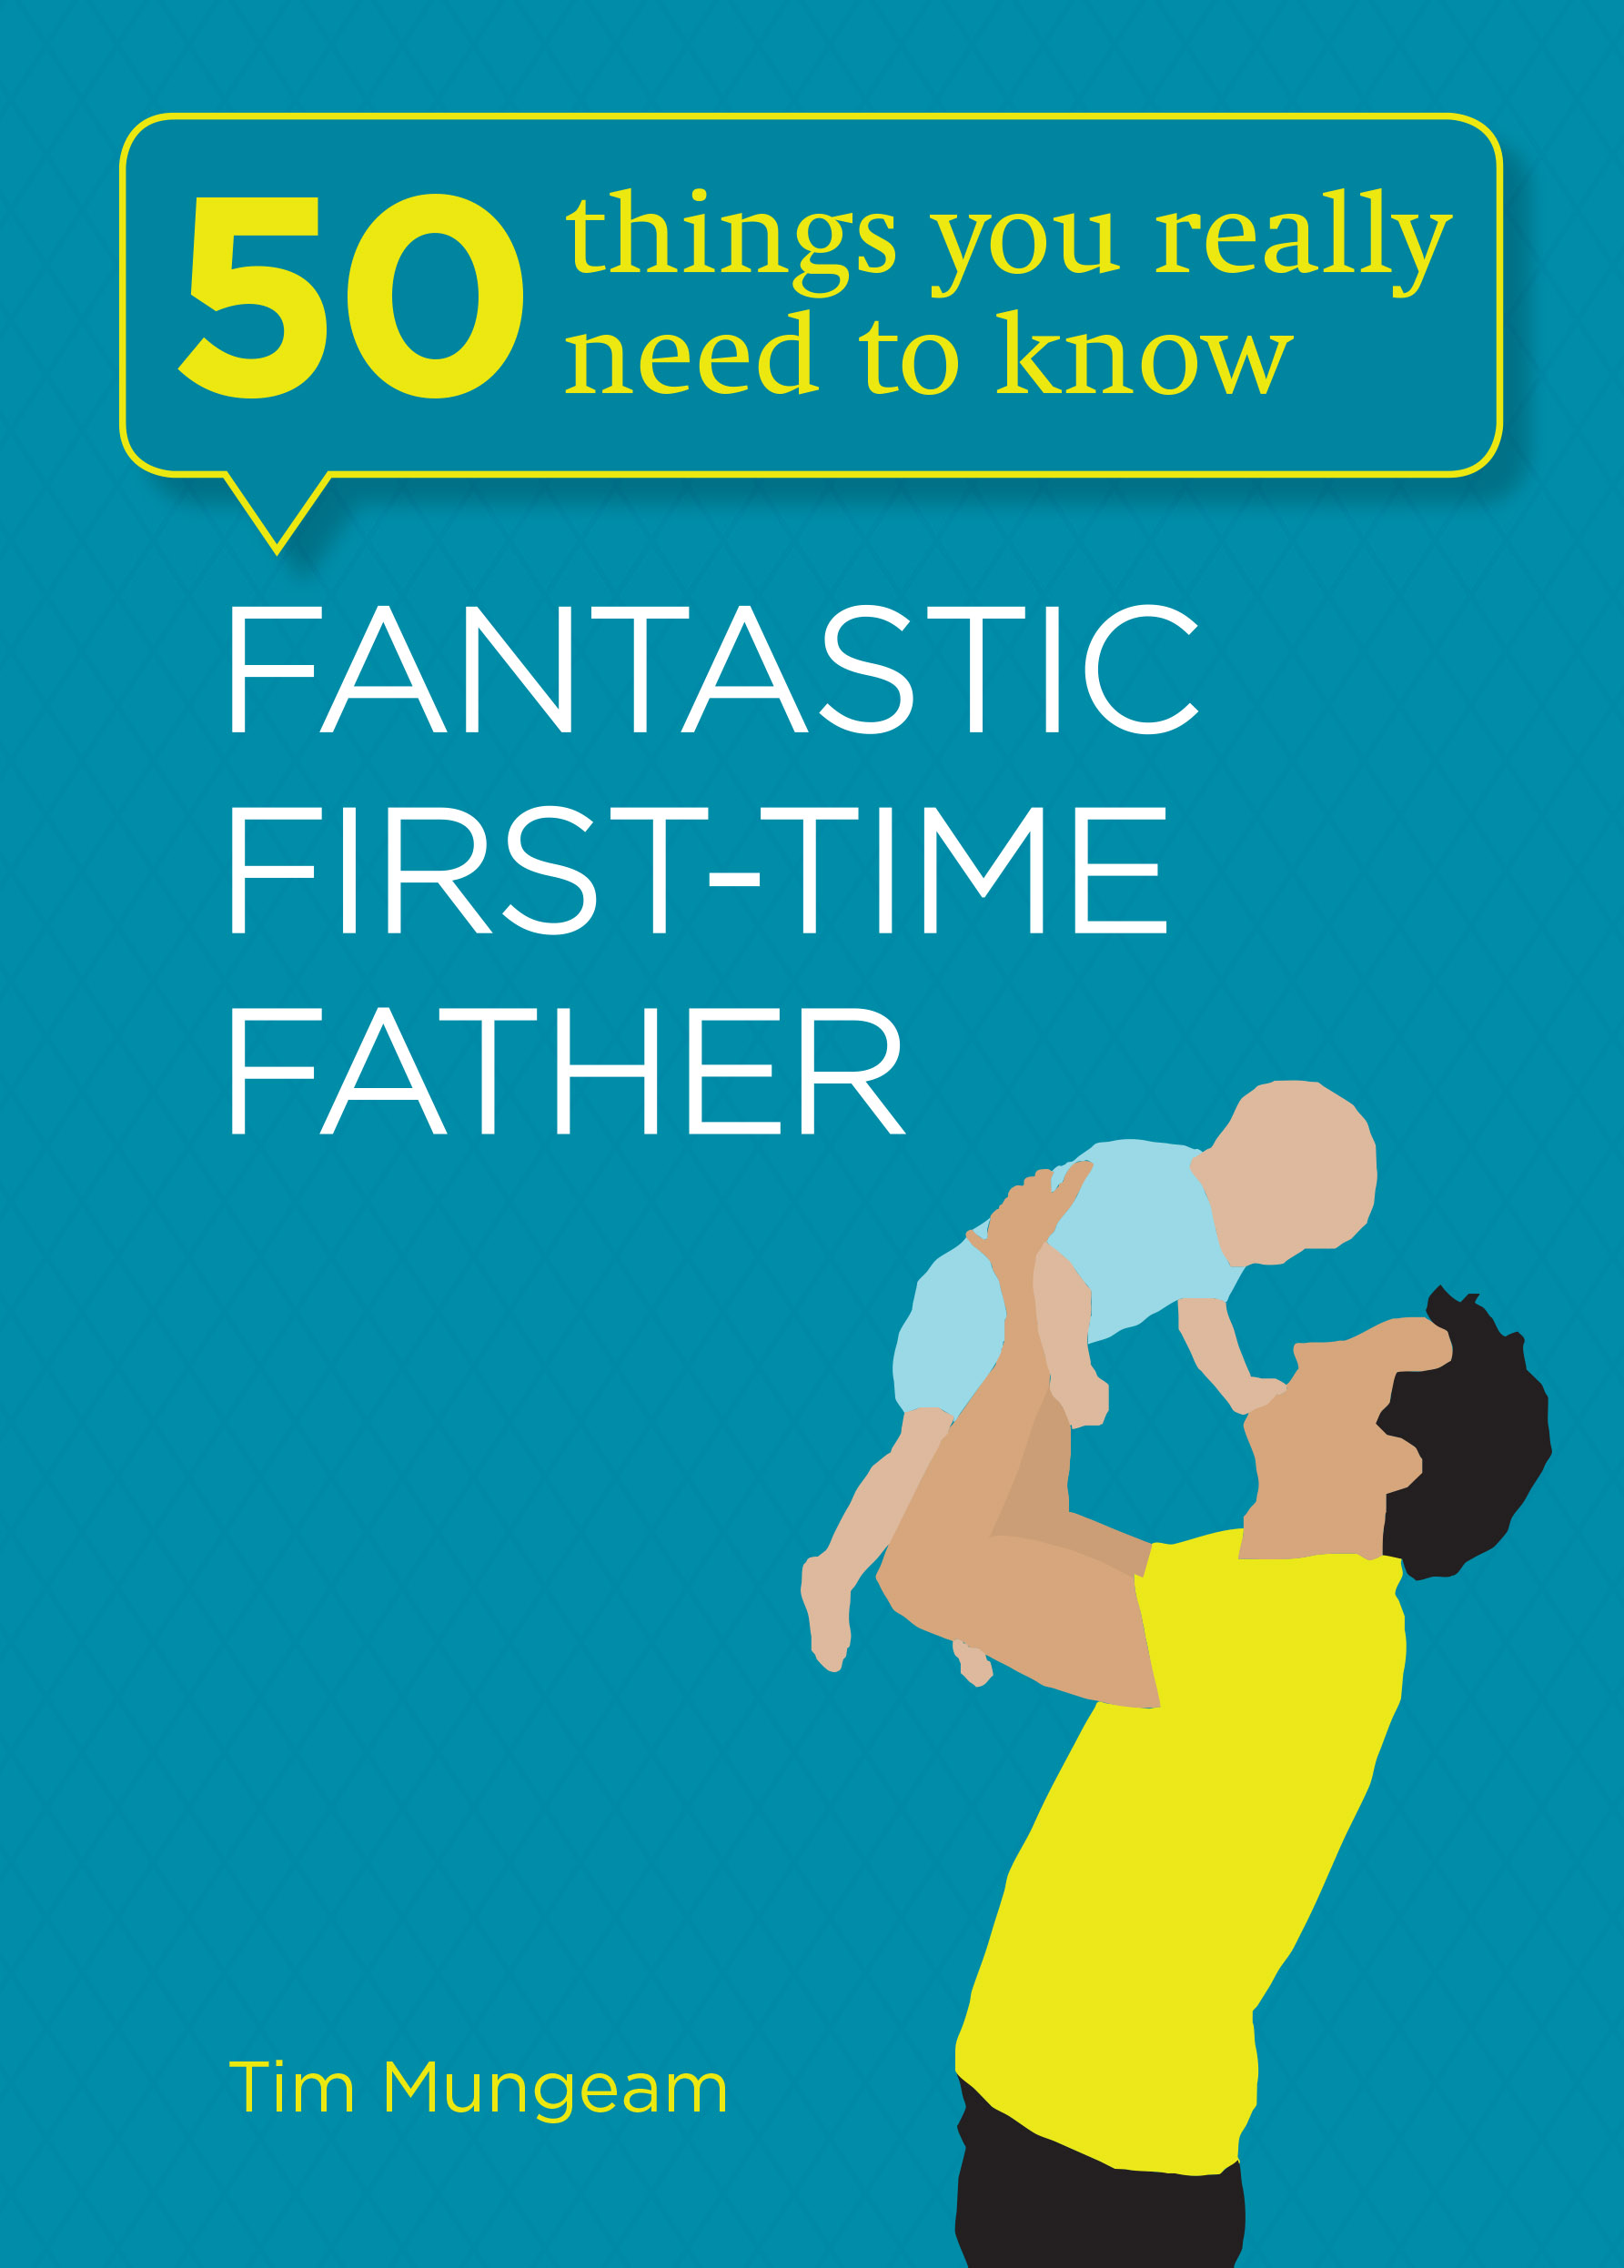 Fantastic Firts-time Father by Tim Mungeam